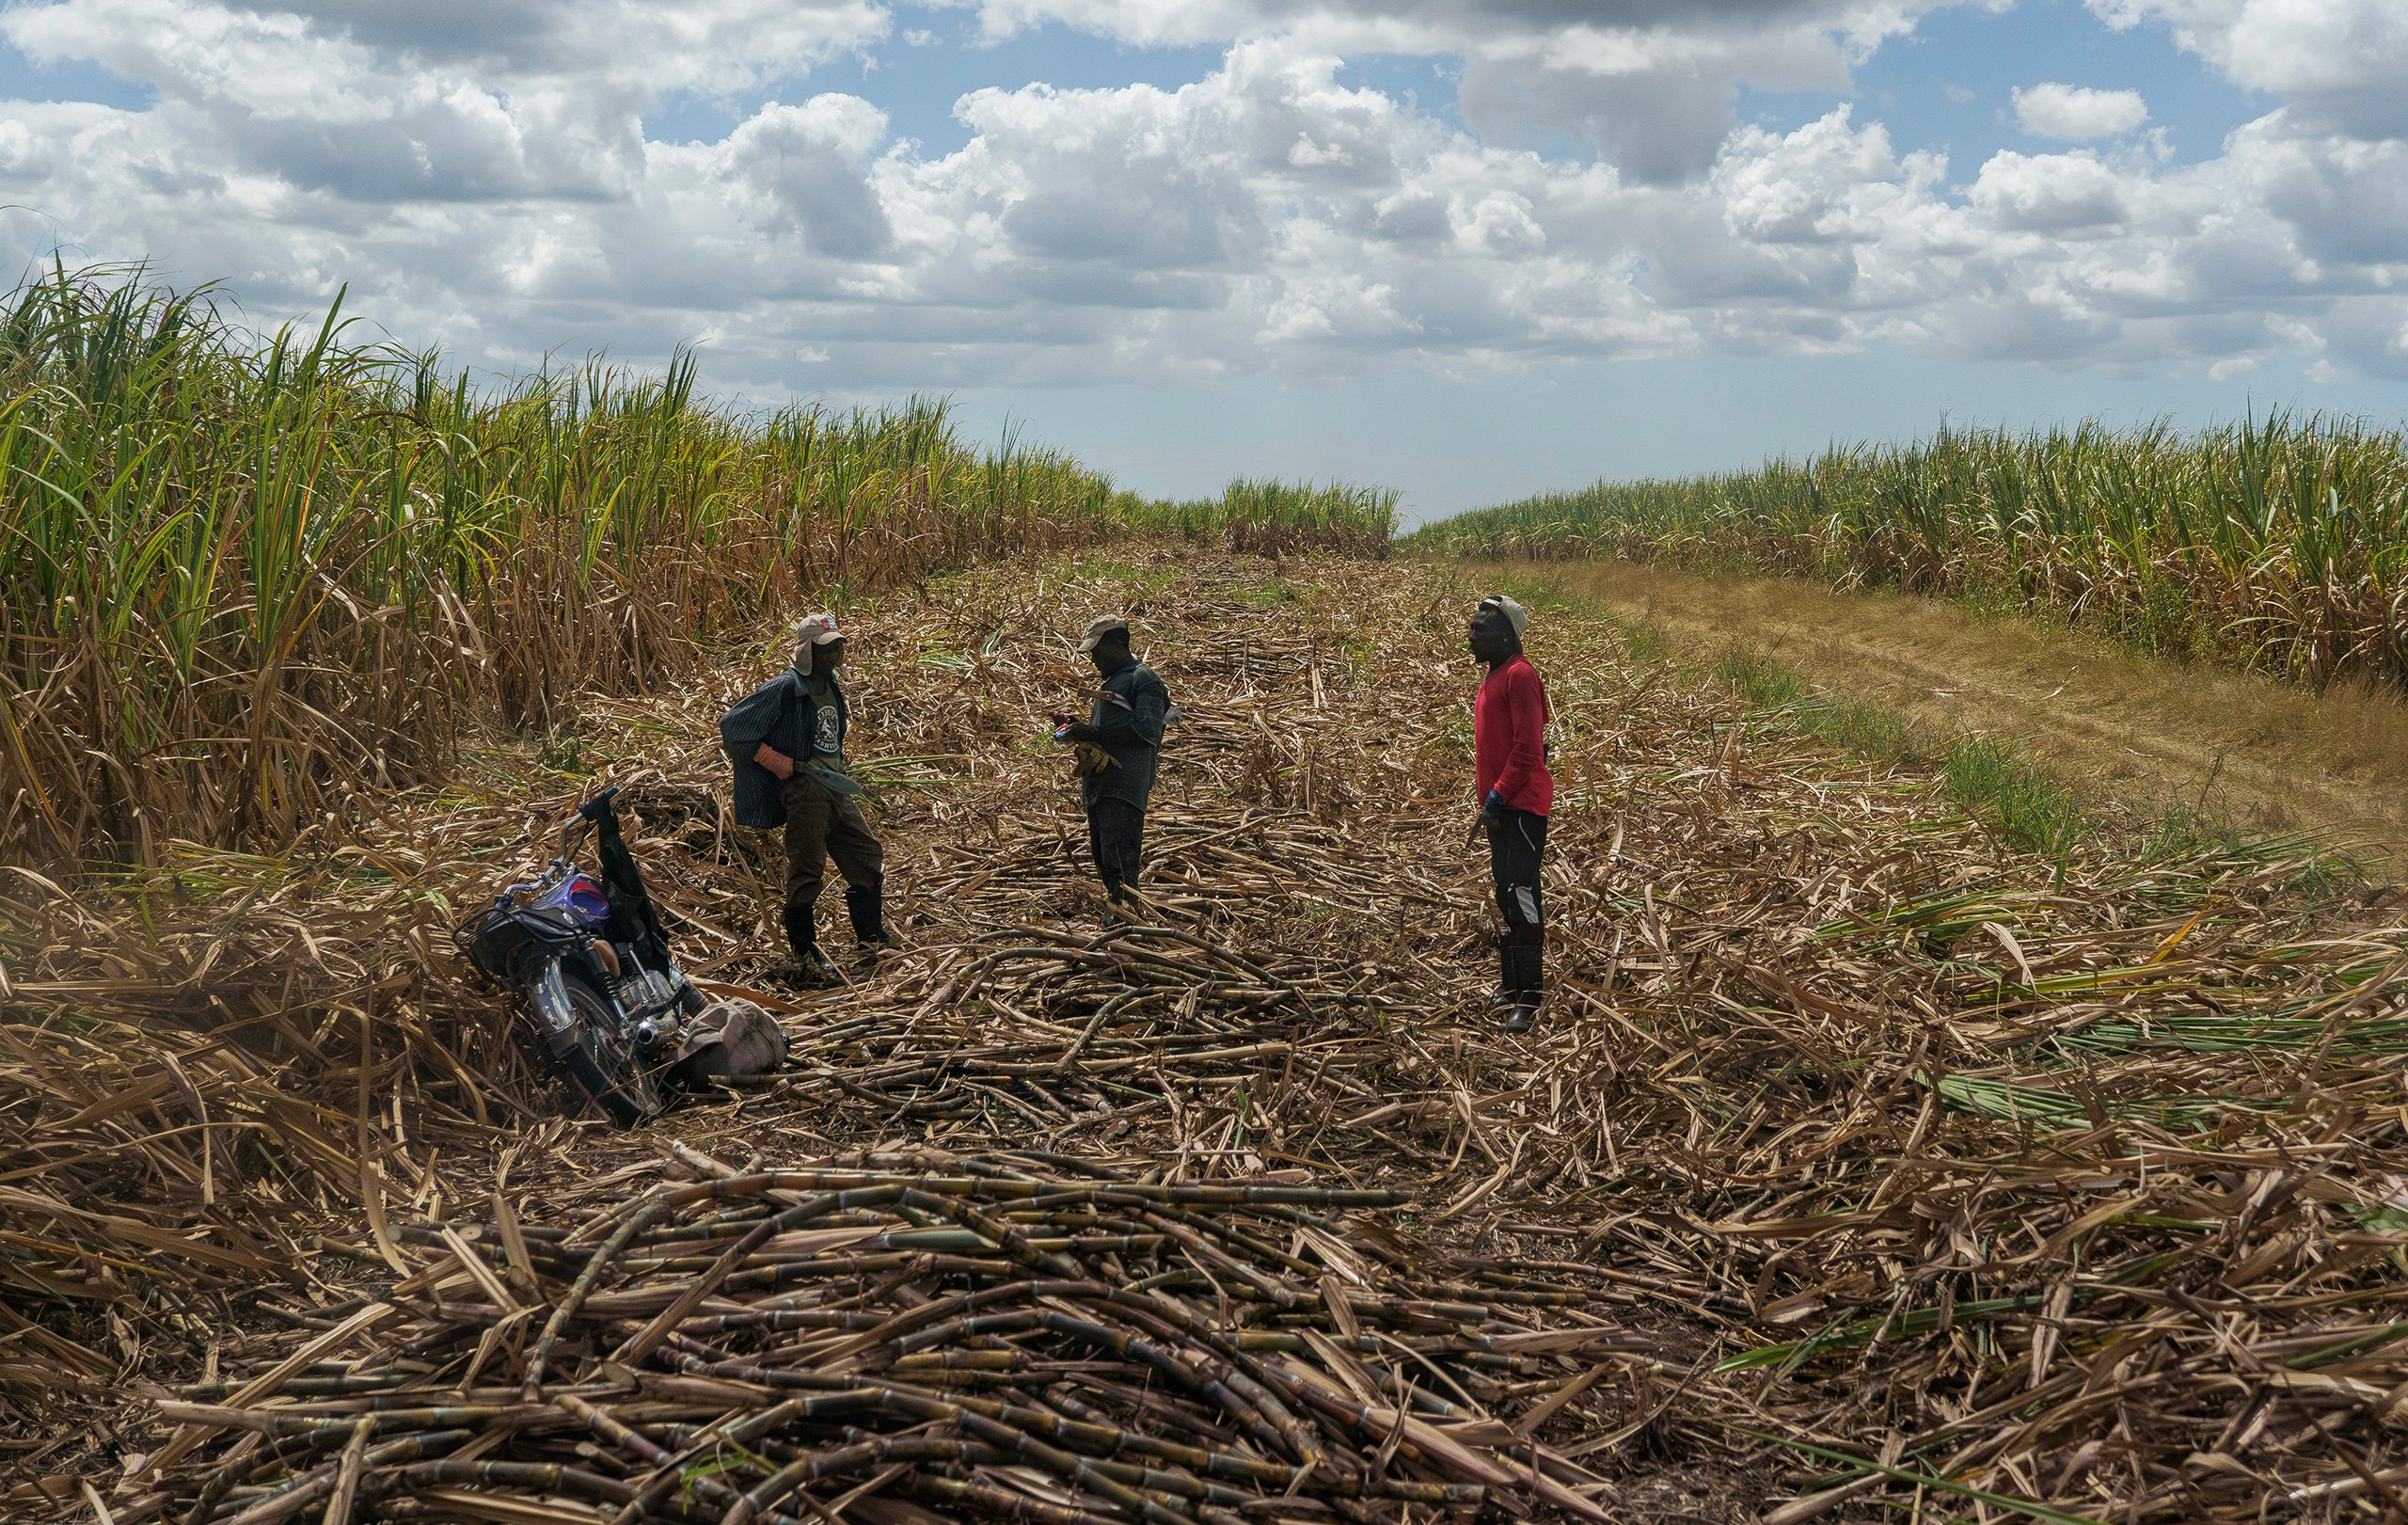 Three workers stand in a clearing surrounded by sugar cane stalks ready for harvest in La Romana province, Dominican Republic, in March. Before the U.S. ordered an embargo on Central Romana’s sugar due to forced labor conditions, much of the sugar harvested in these fields would have been exported to the United States under low tariffs. (Photo by John Leos/Cronkite Borderlands Project)
